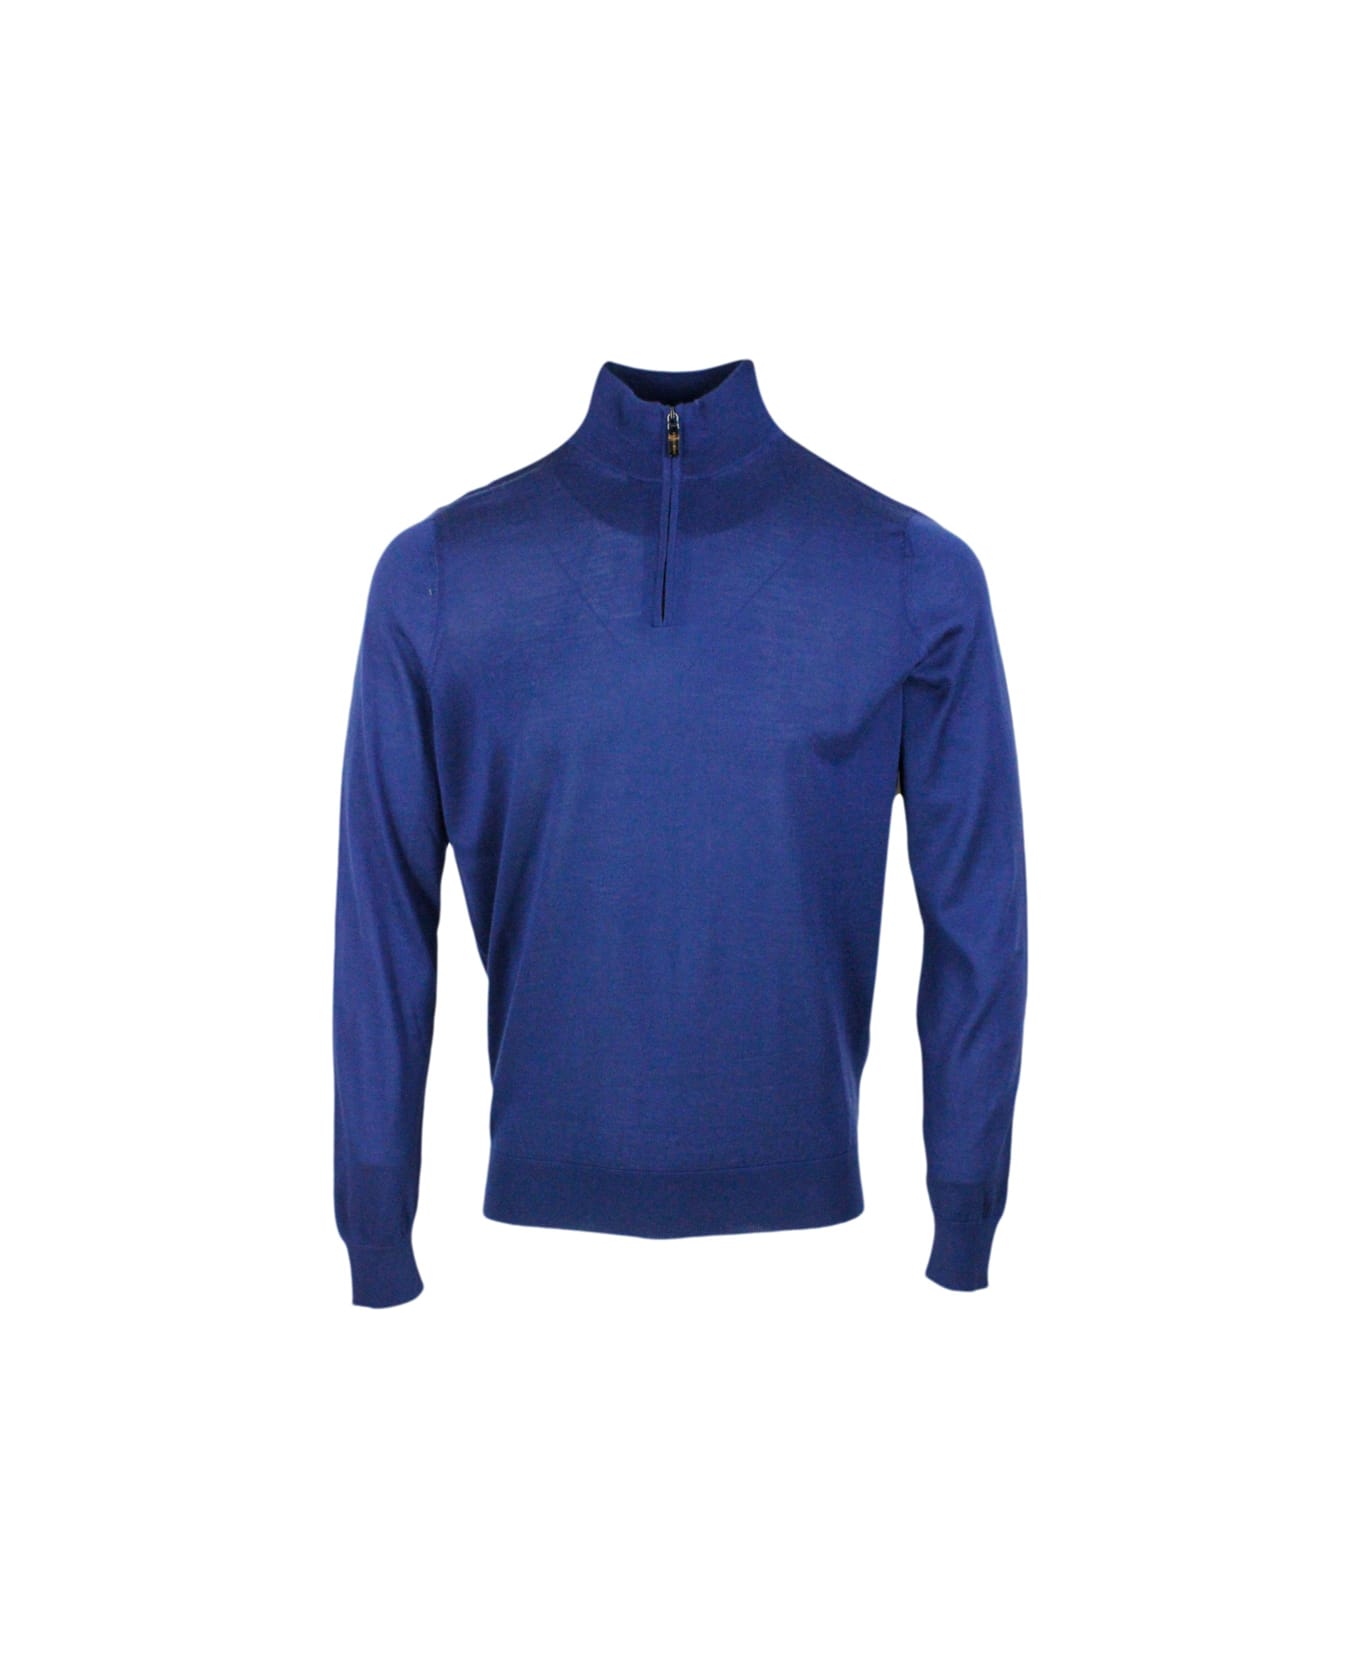 Colombo Light Half-zip Long-sleeved Sweater In Fine 100% Cashmere And Silk With Special Processing On The Profile Of The Neck - Blu royal